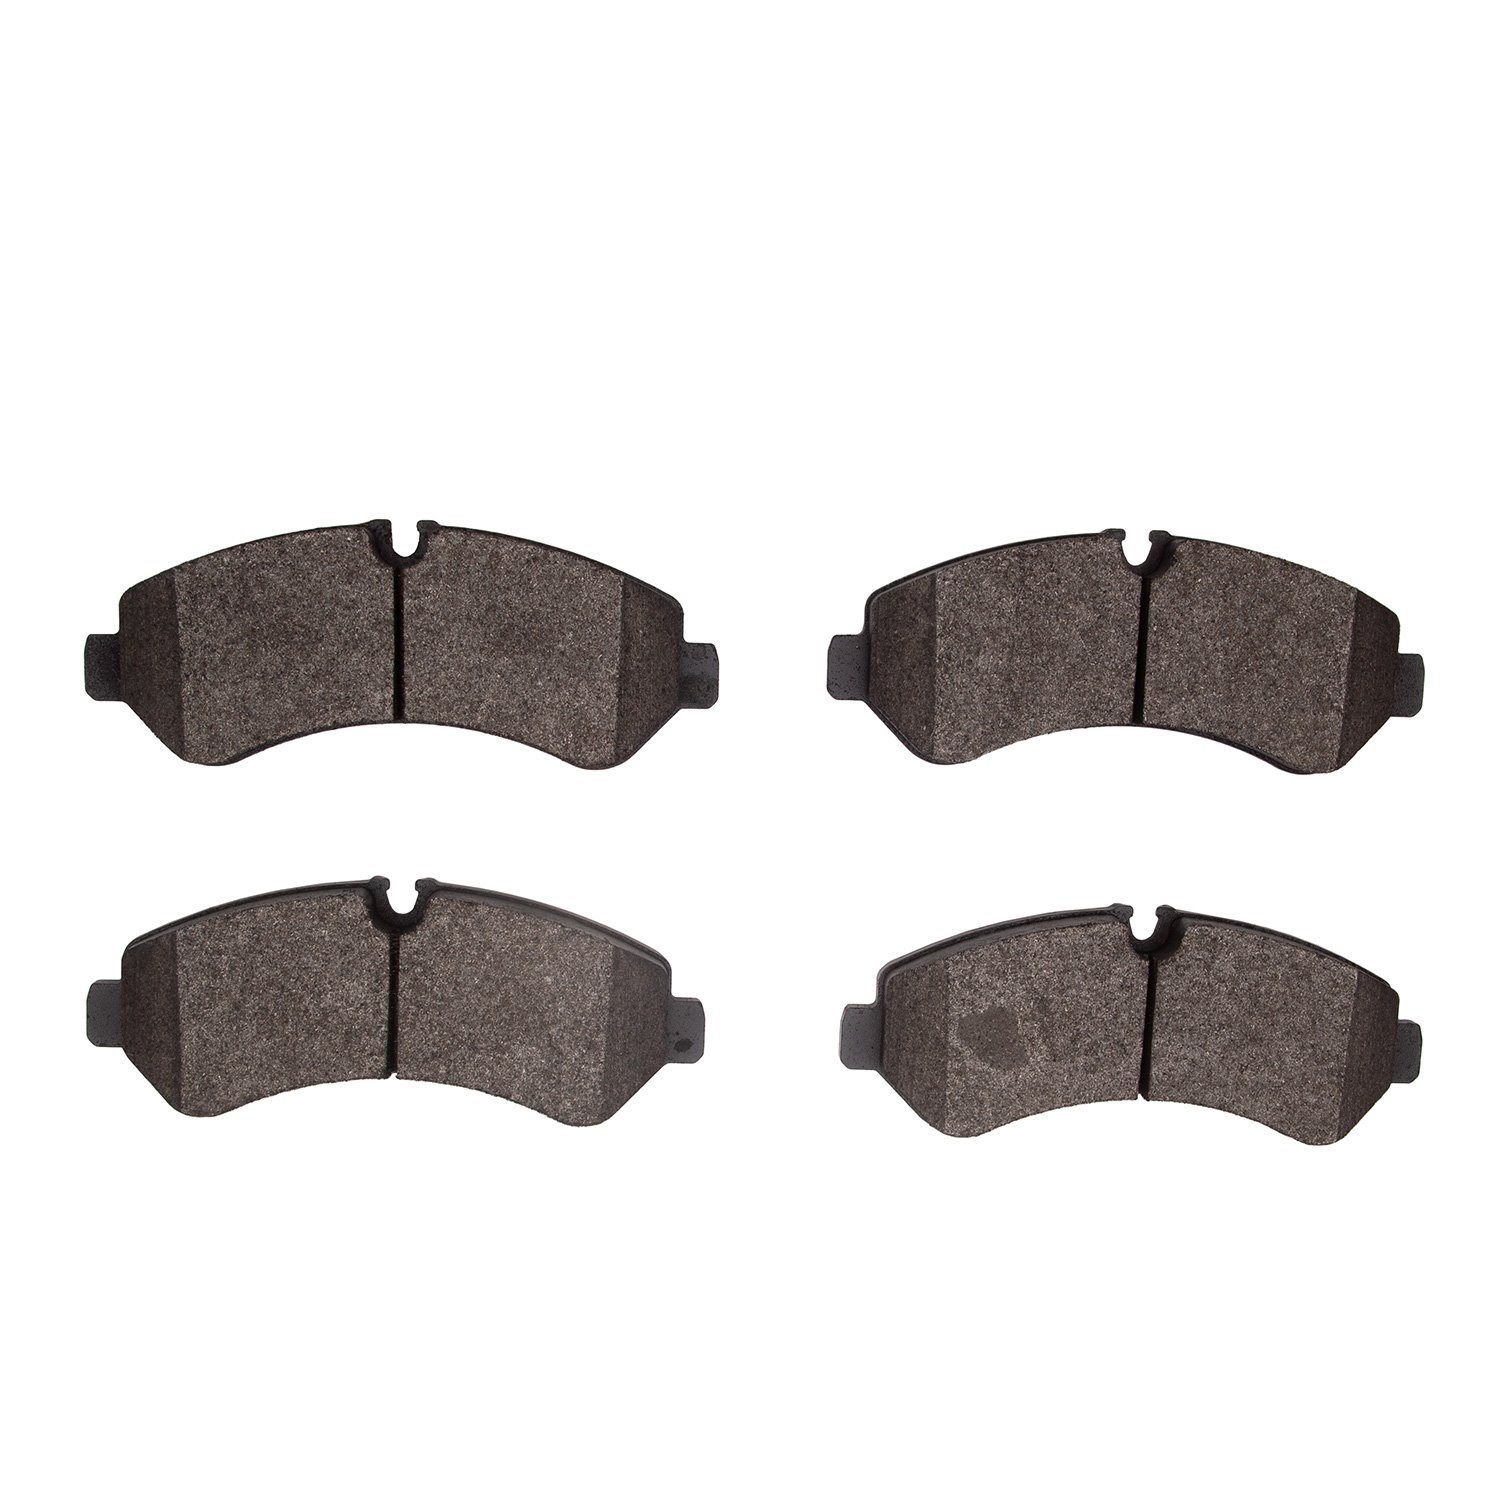 Optimum OE Brake Pads, Fits Select Fits Multiple Makes/Models, Position: Rear Right